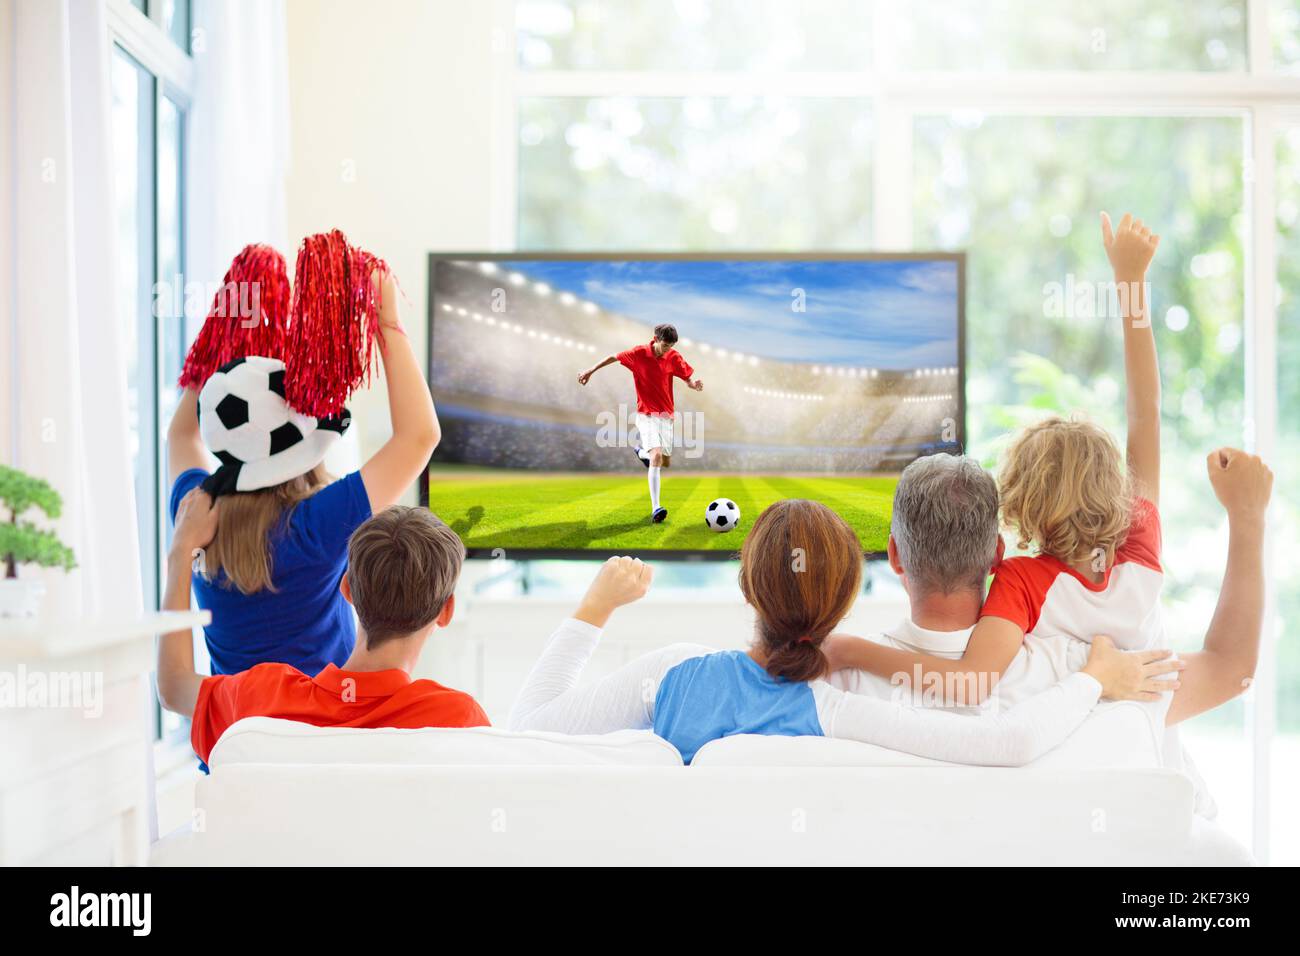 3 Ways to Watch Football (Soccer) - wikiHow